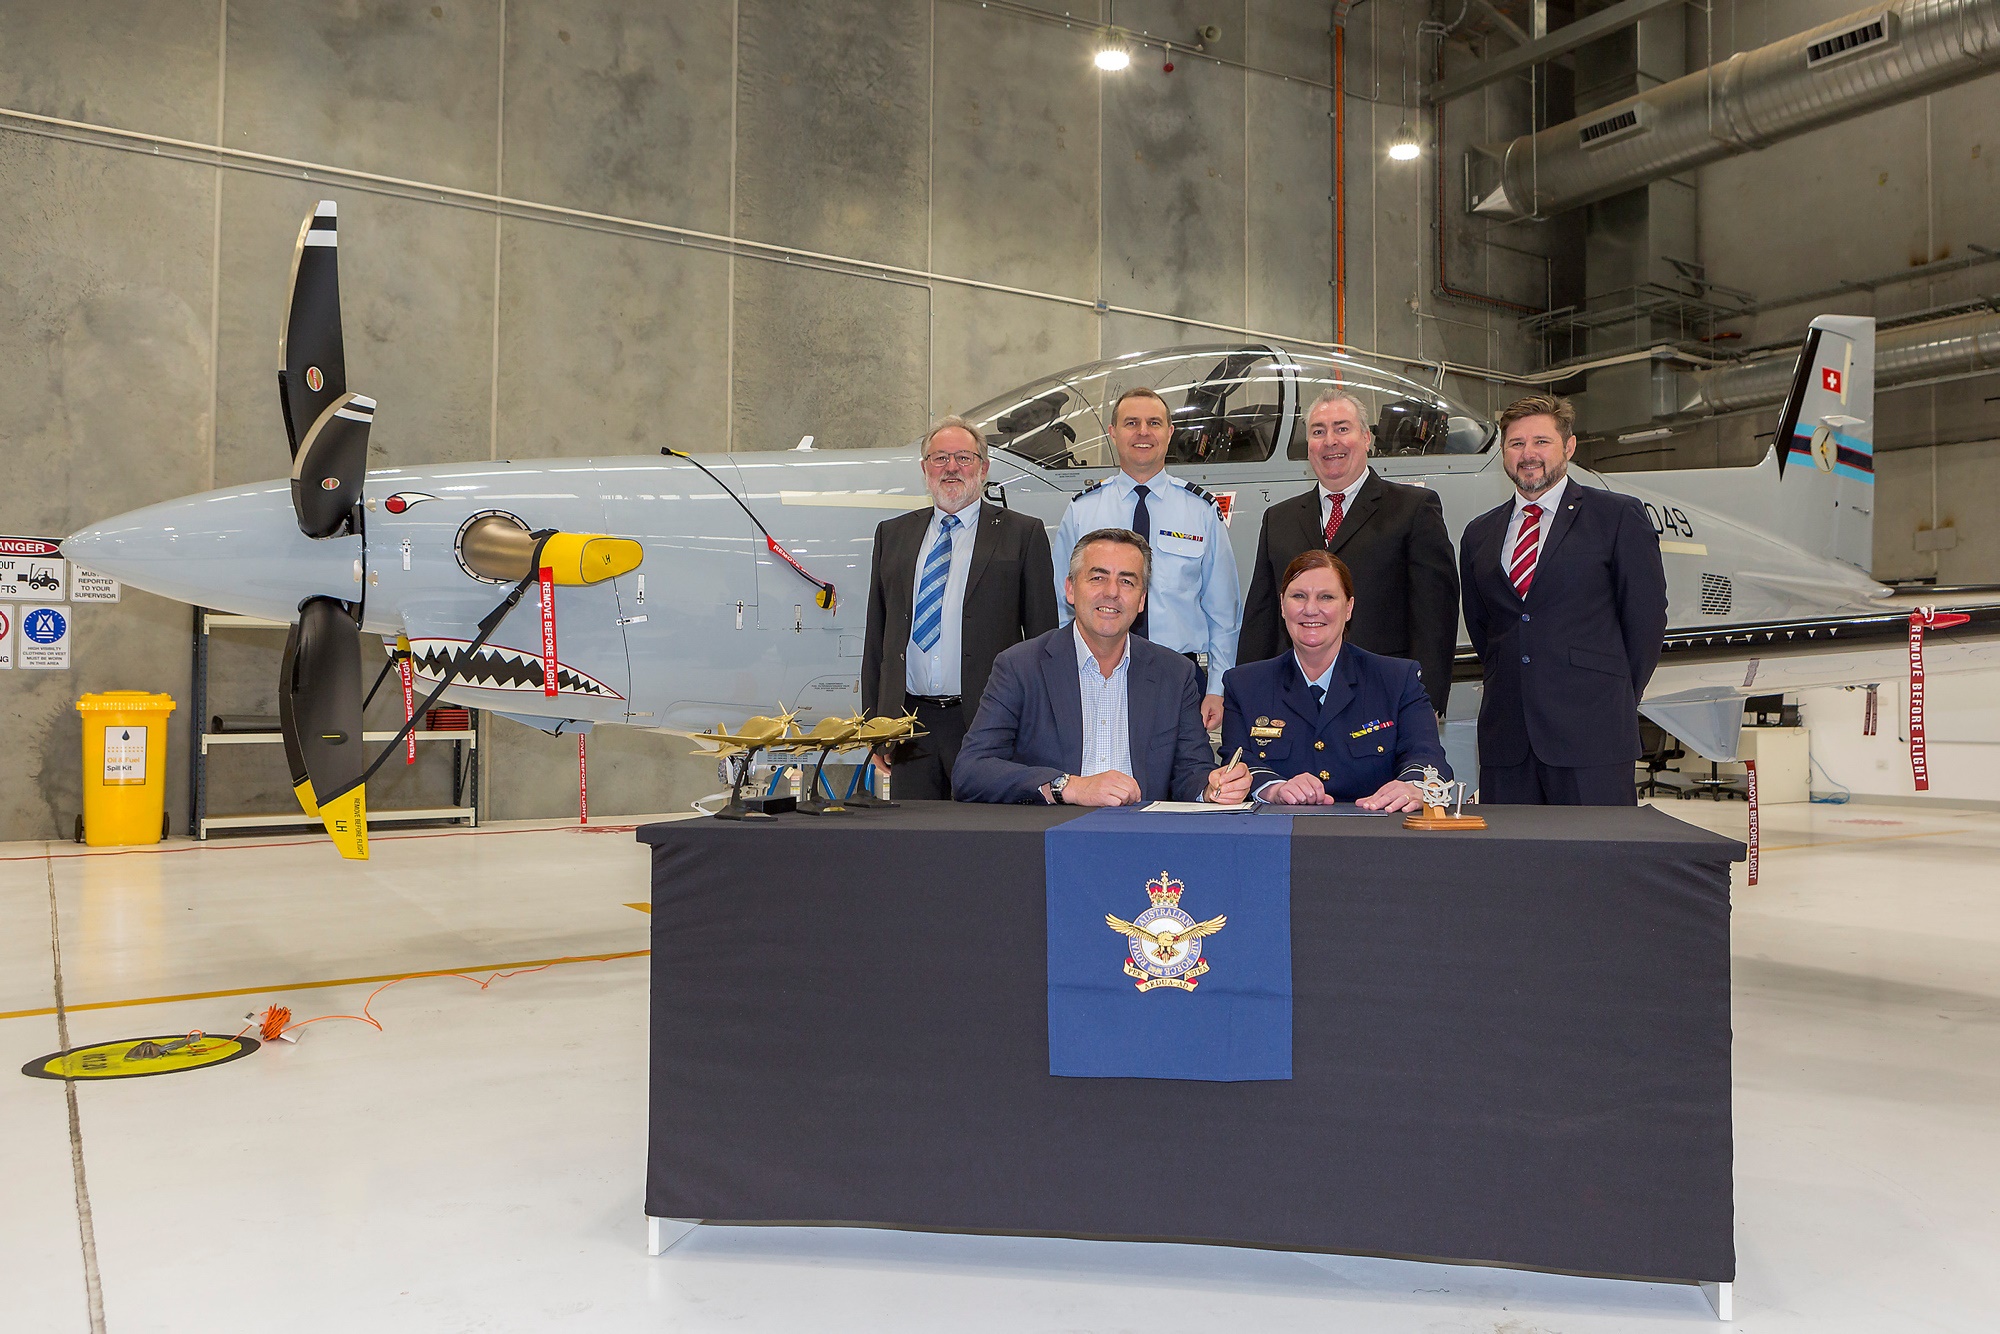 Minister for Veterans and Defence Personnel, the Hon. Darren Chester MP (r), and Air Force officer, Head of Air Force Capability, Air Vice-Marshal Catherine Roberts, sign the Certificate of Achievement at the final delivery ceremony for the new RAAF Pilatus PC-21s at RAAF Base East Sale.